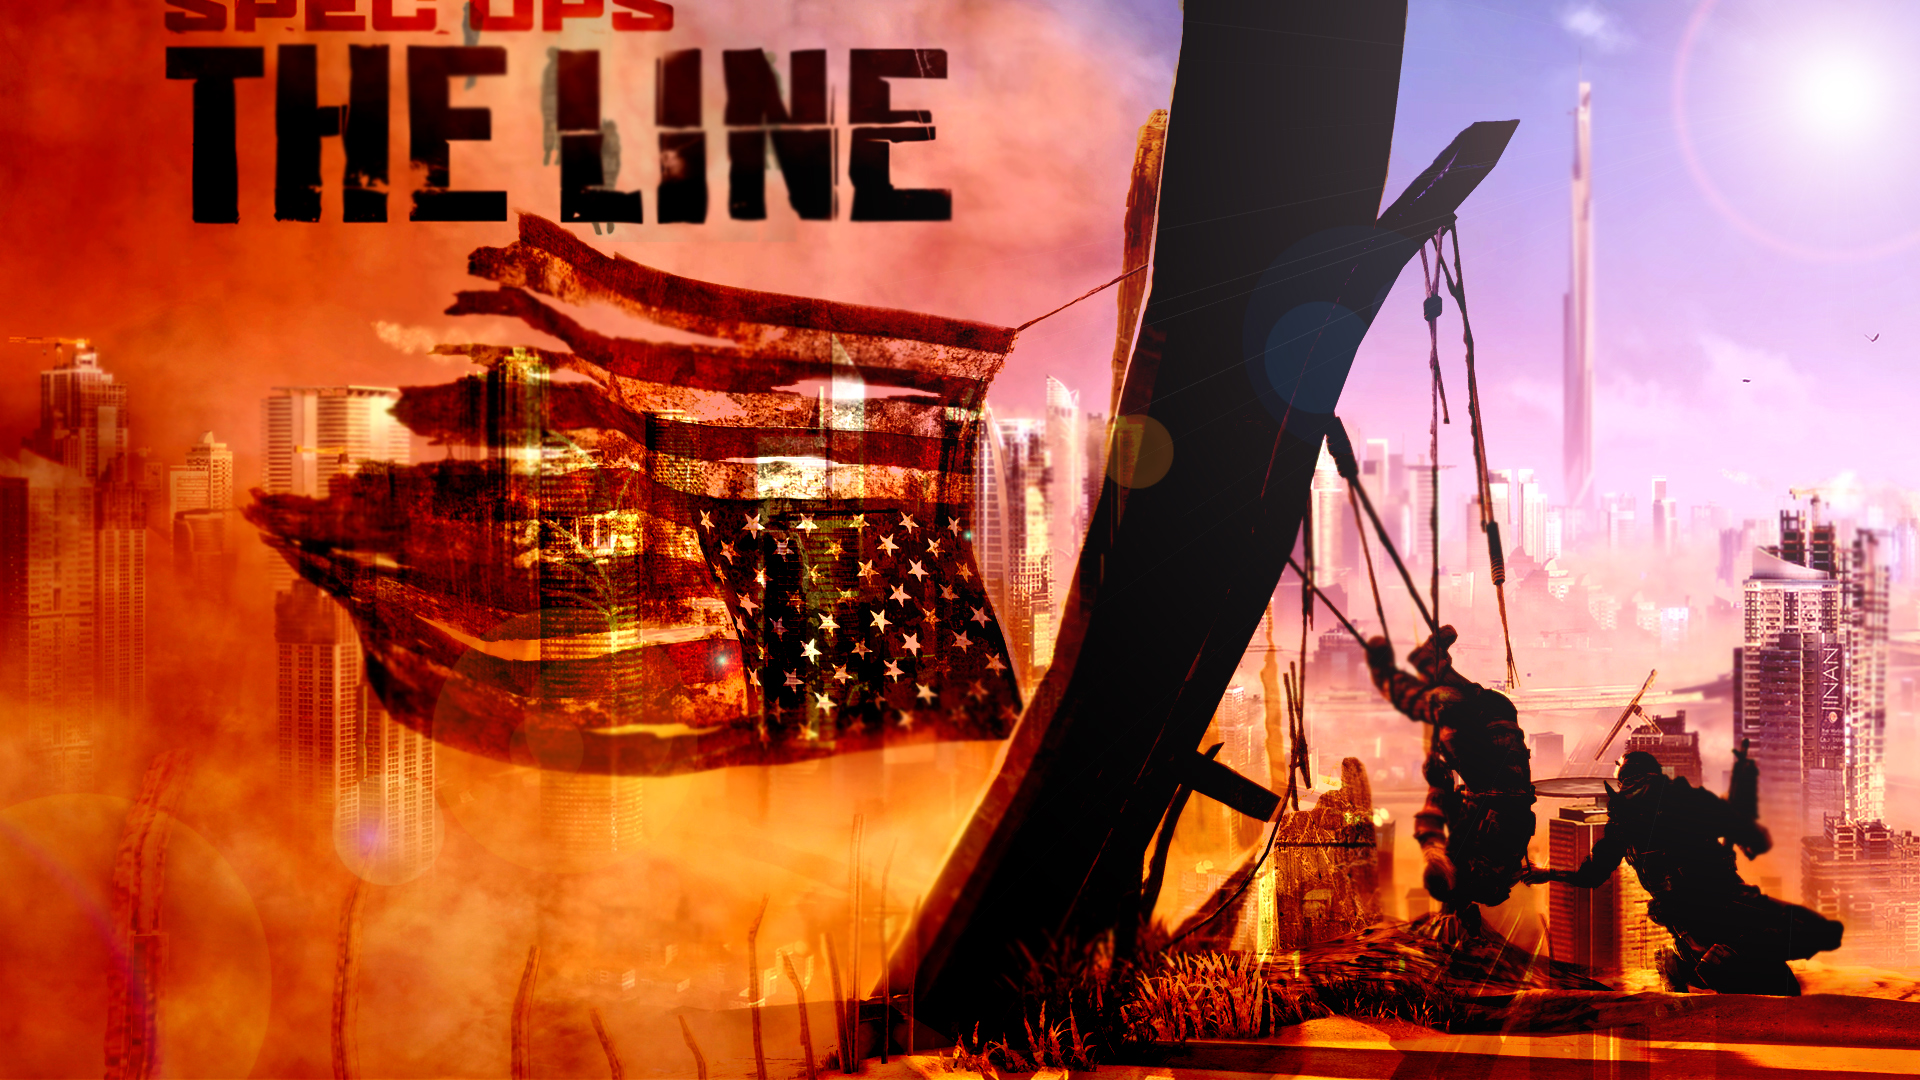 Spec Ops The Line Flagpole - HD Wallpaper 